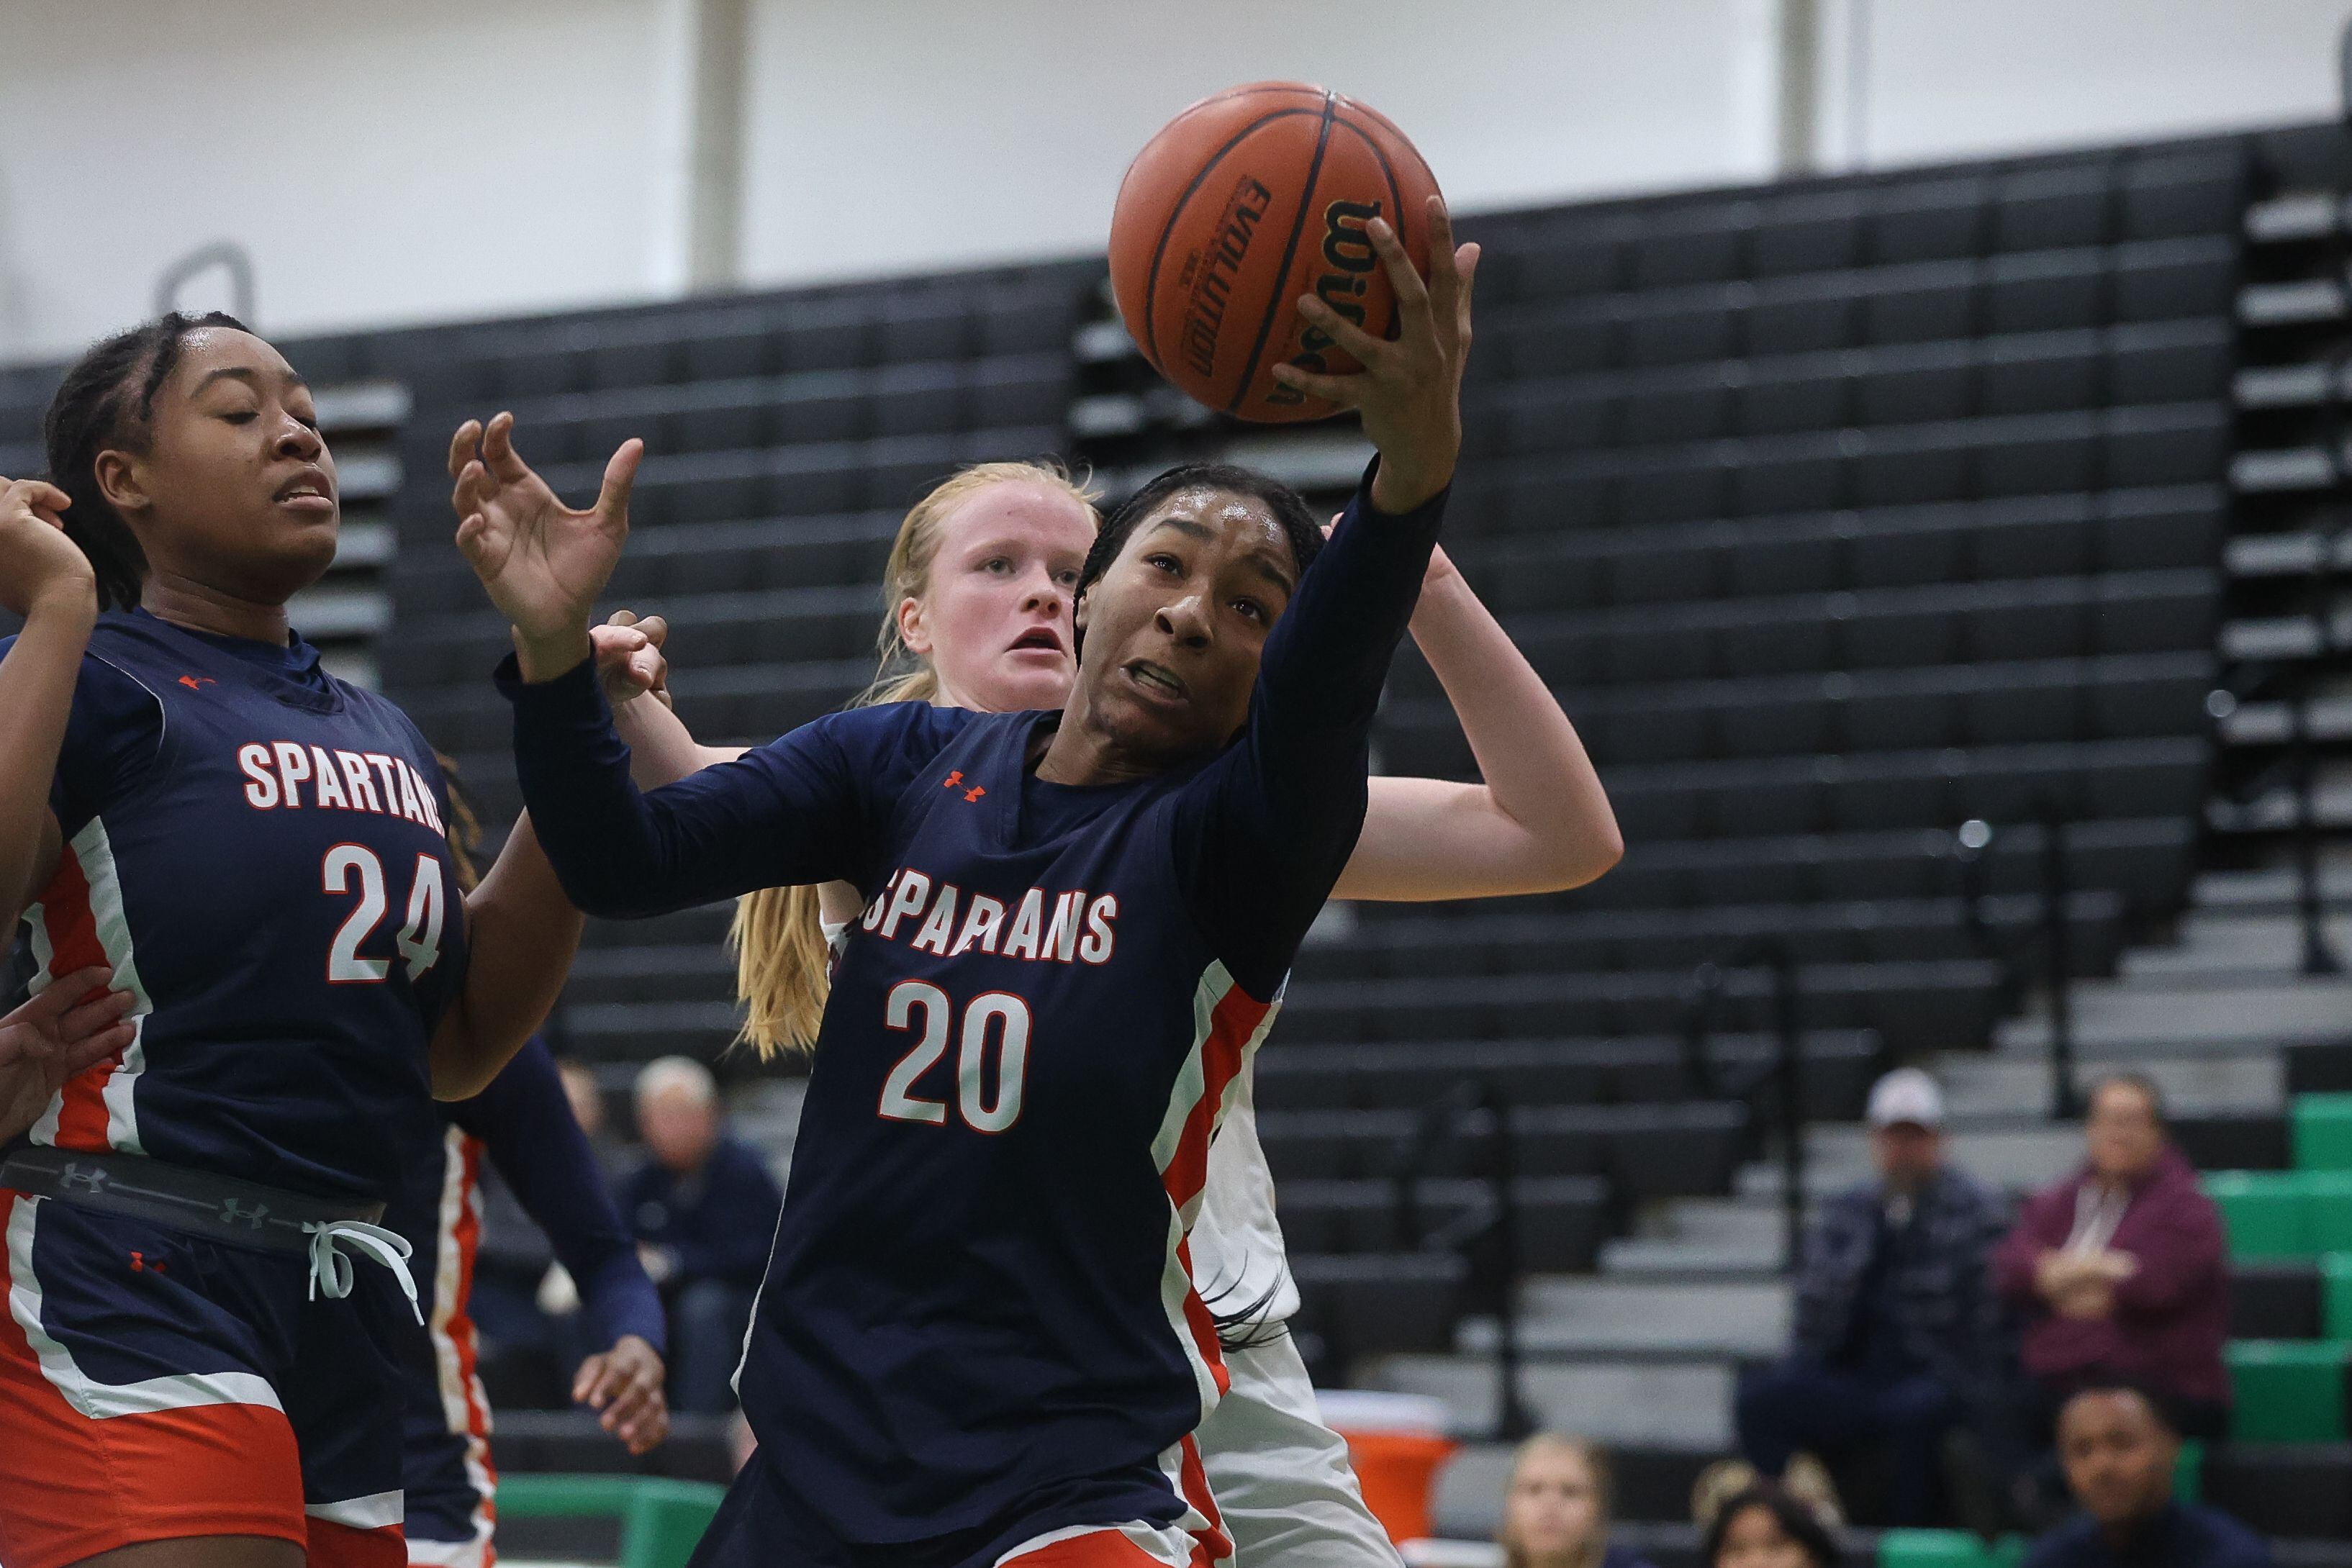 Romeoville’s Laila Houseworth stretches for the rebound against Lockport in the Oak Lawn Holiday Tournament championship on Saturday, Dec.16th in Oak Lawn.